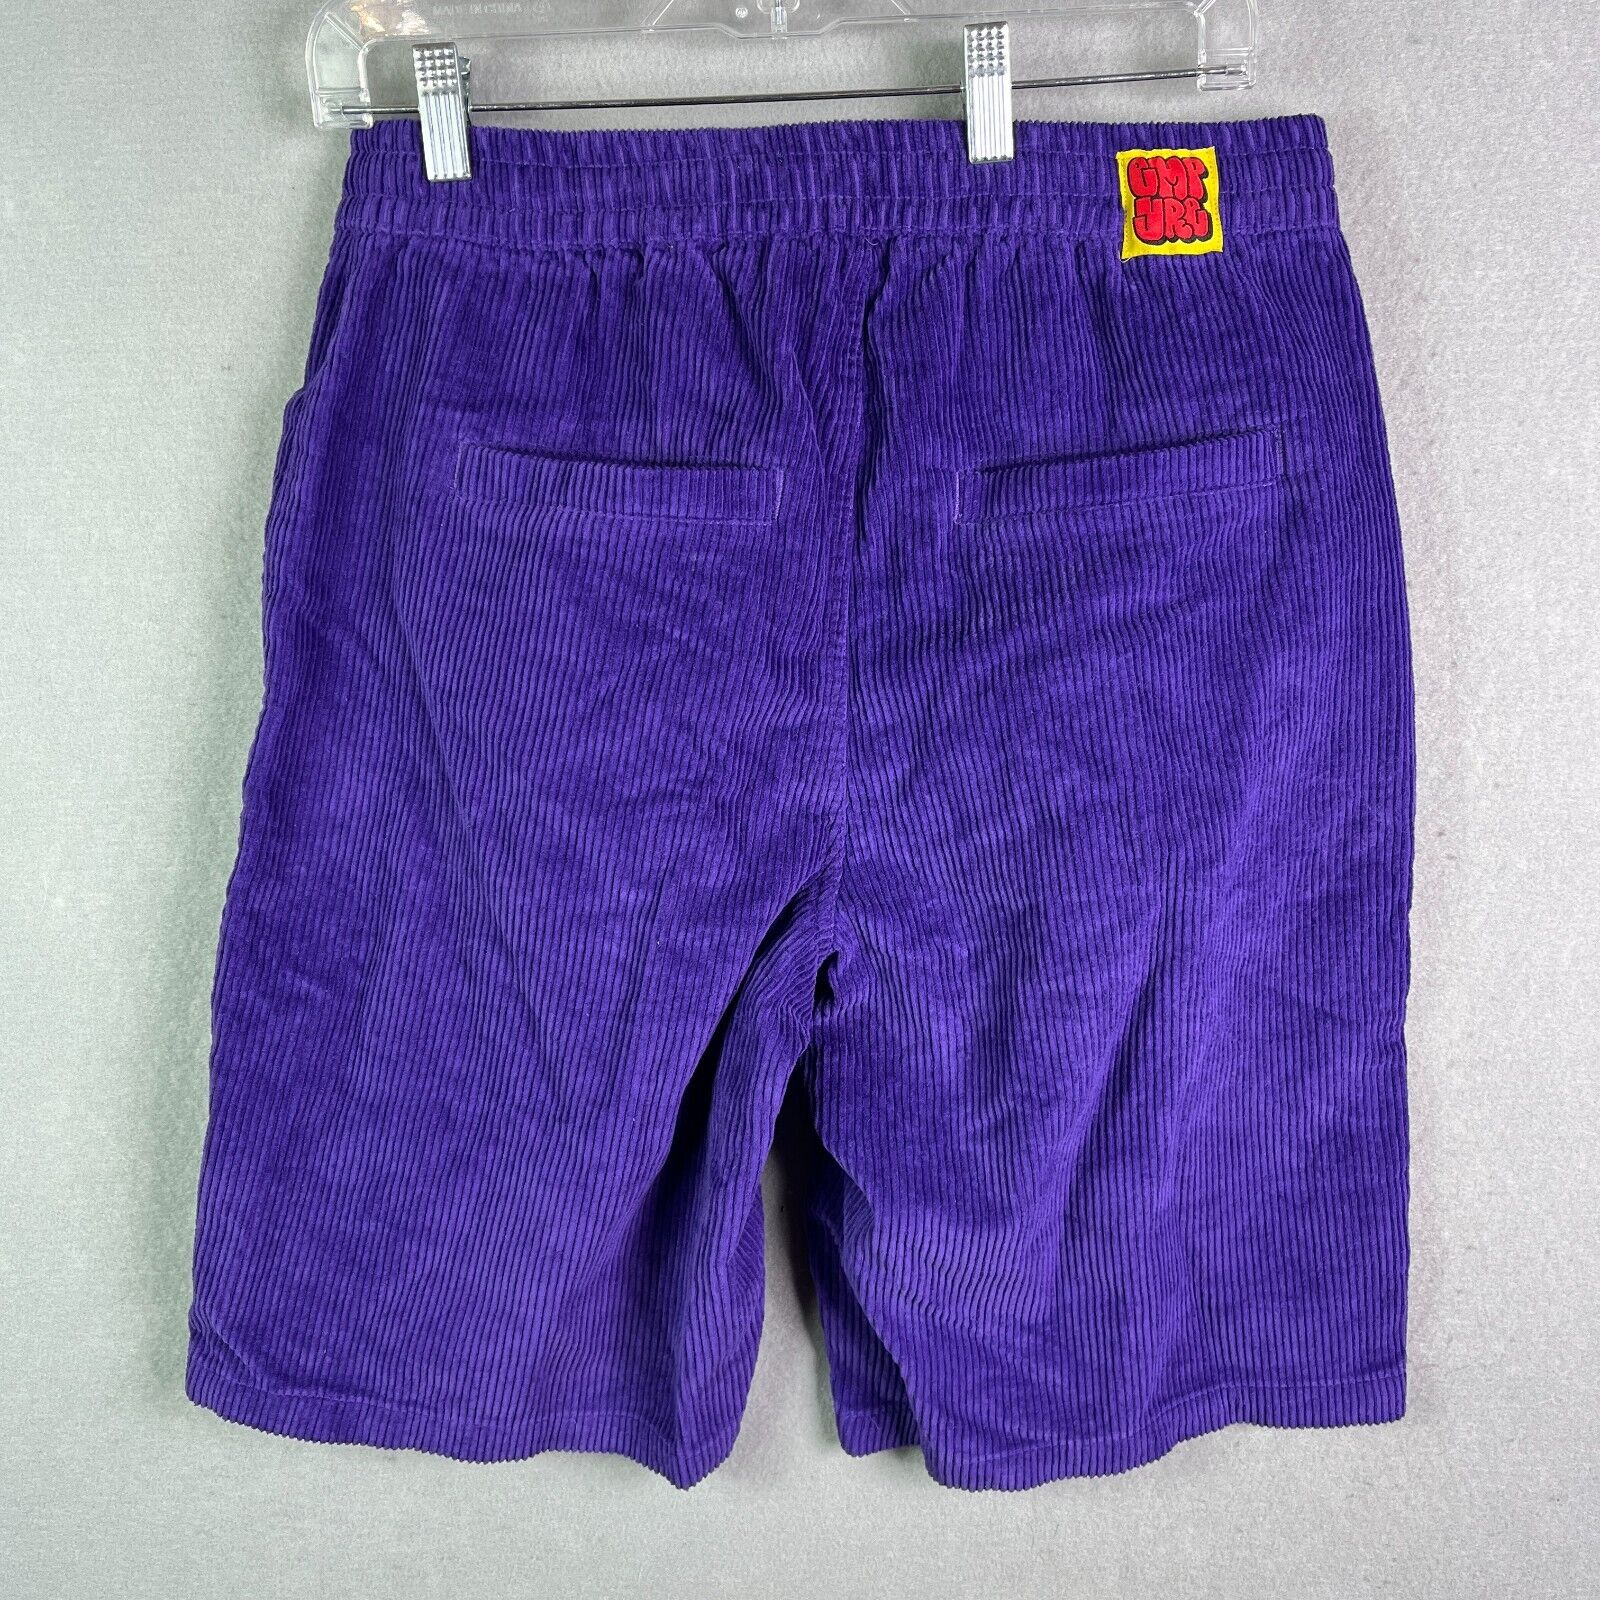 Empyre Corduroy Shorts Relax Fit Mens Small Purpl… - image 7